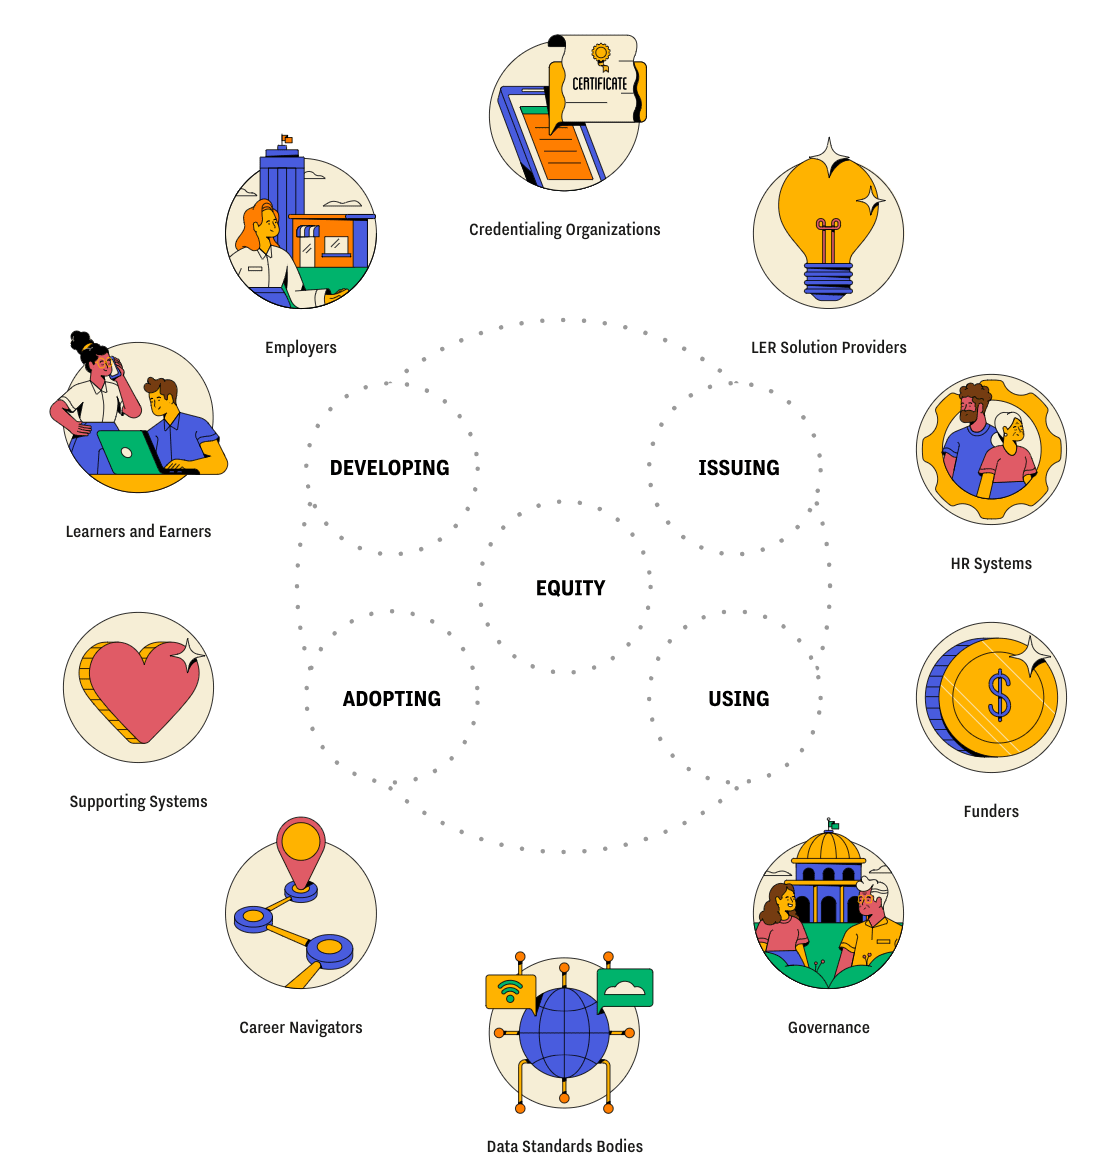 Image from LER map website including circles such as 'Credentialing Organizations' and 'HR Systems' around the outside, and 'Developing', 'Issuing', 'Adopting' and 'Using' around the central word 'Equity'.